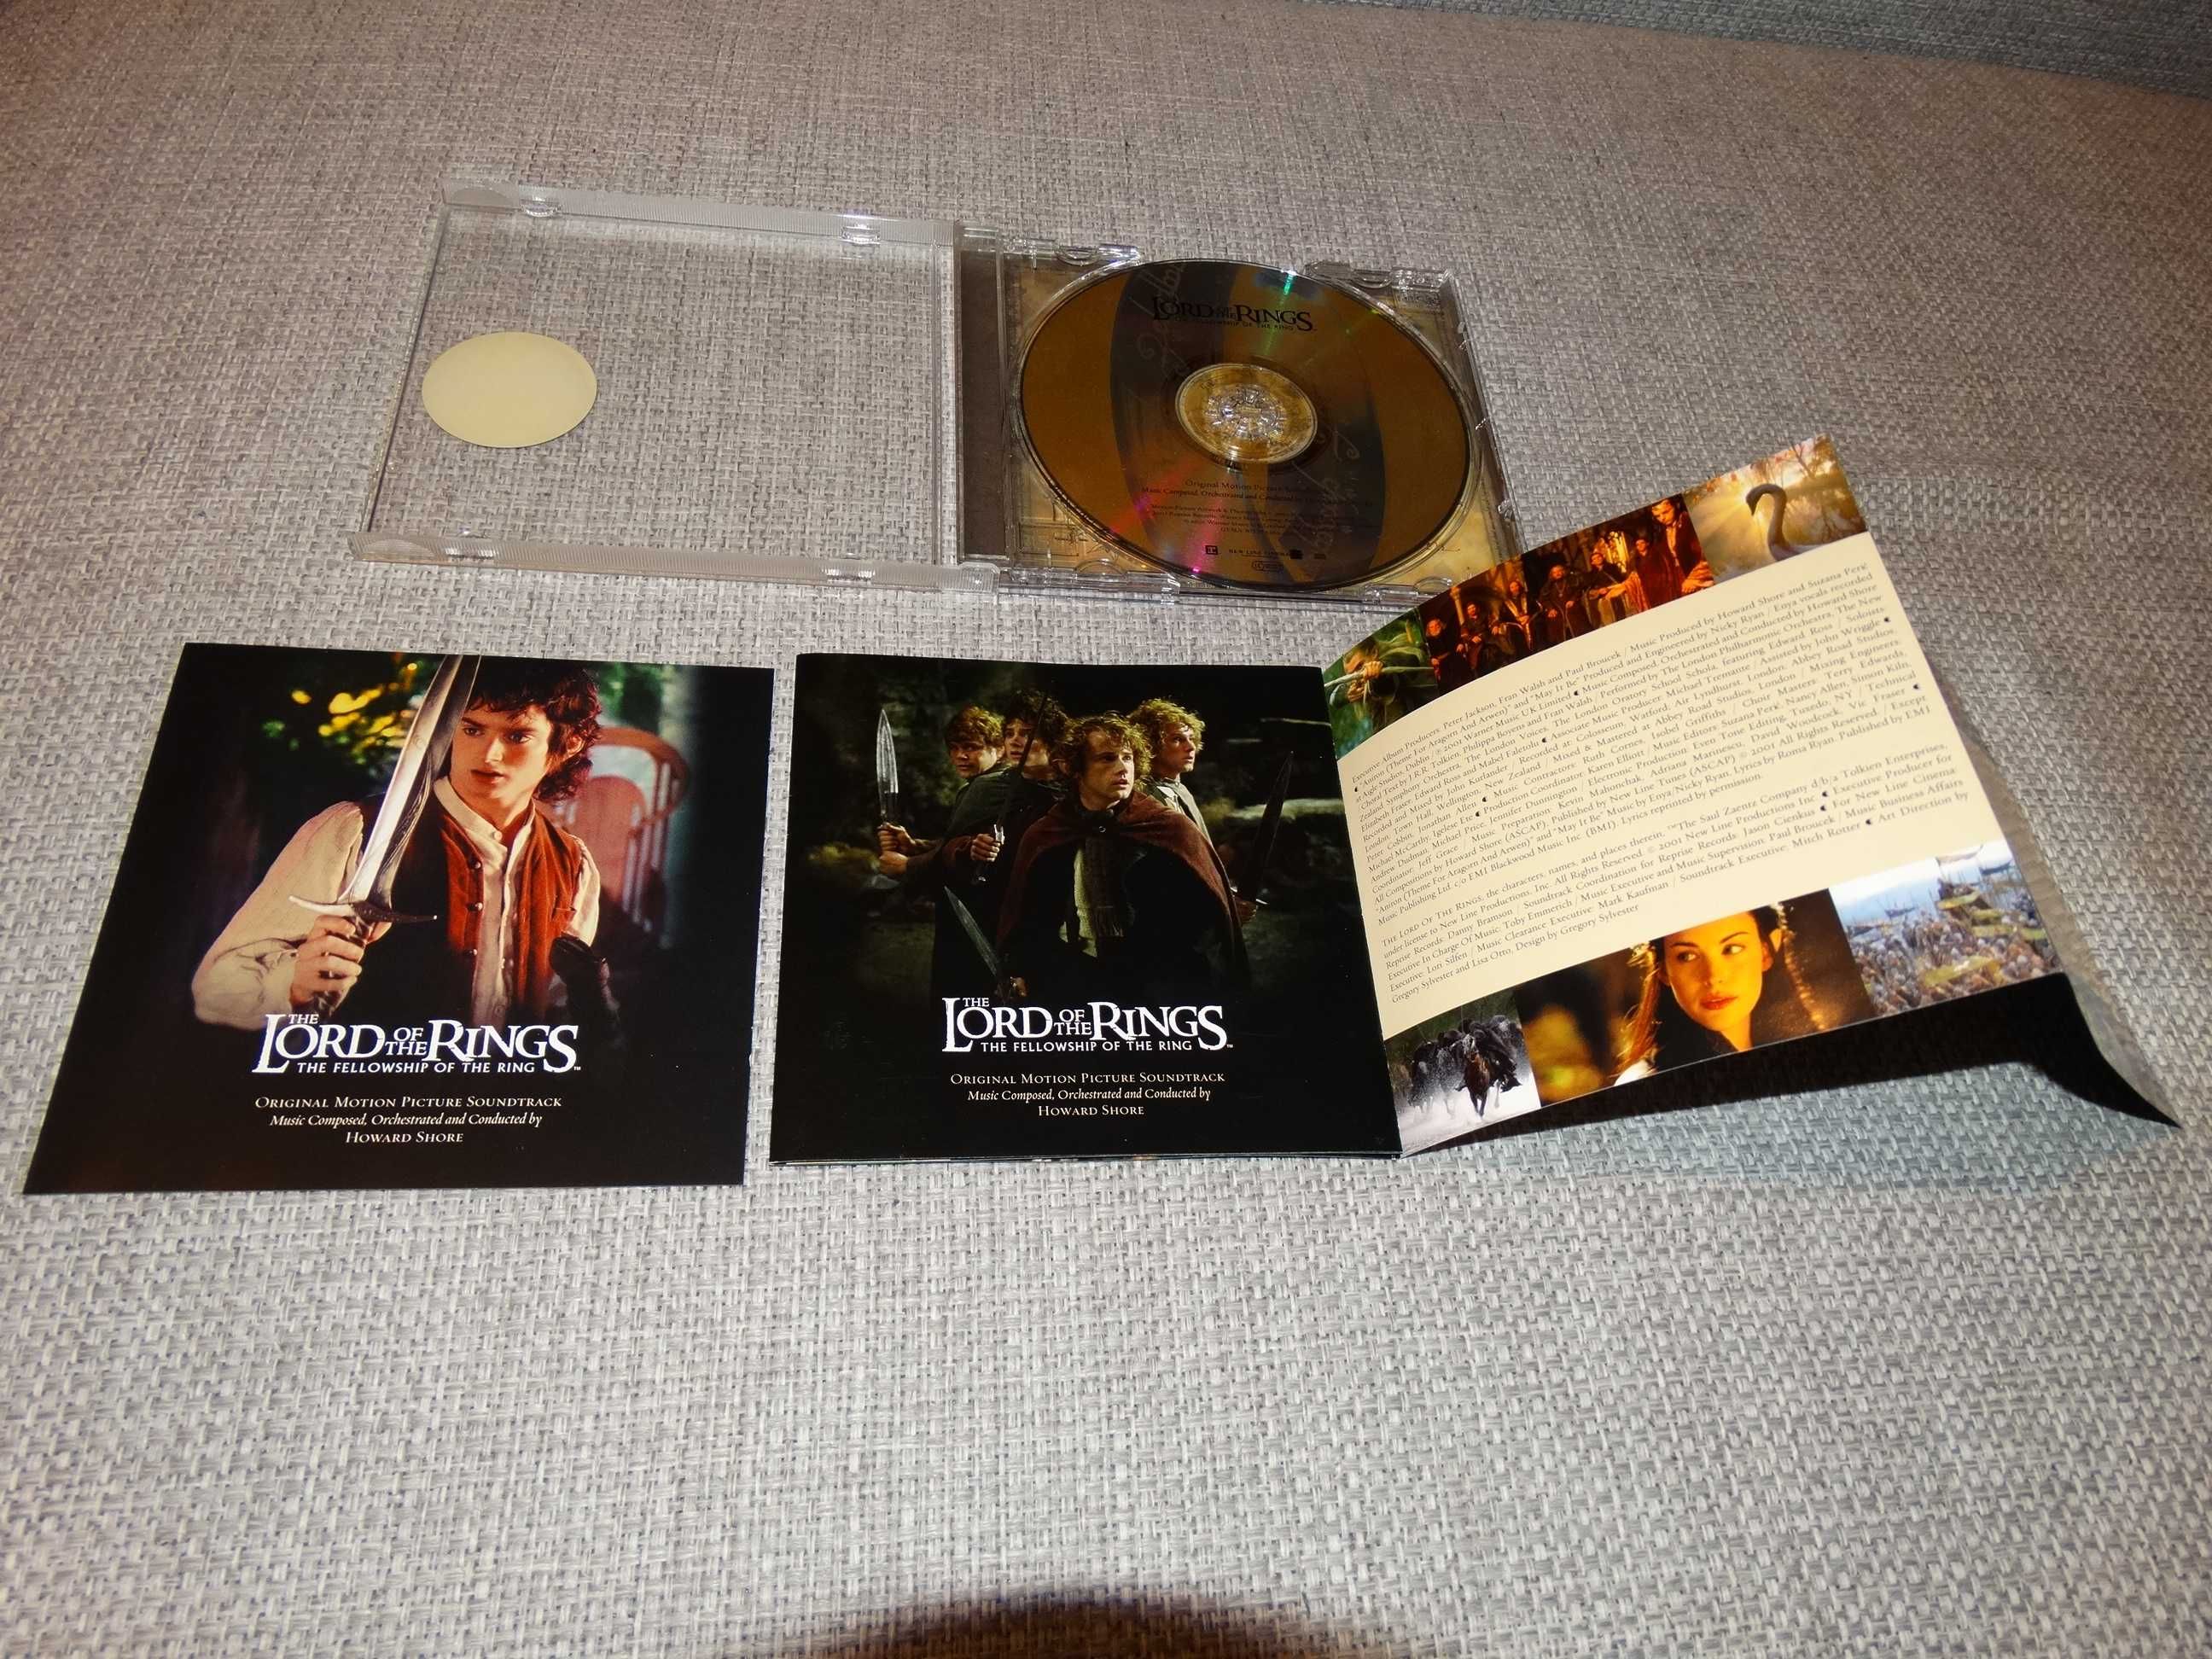 THE lord of the Rings Fellowship   Howard Shore CD